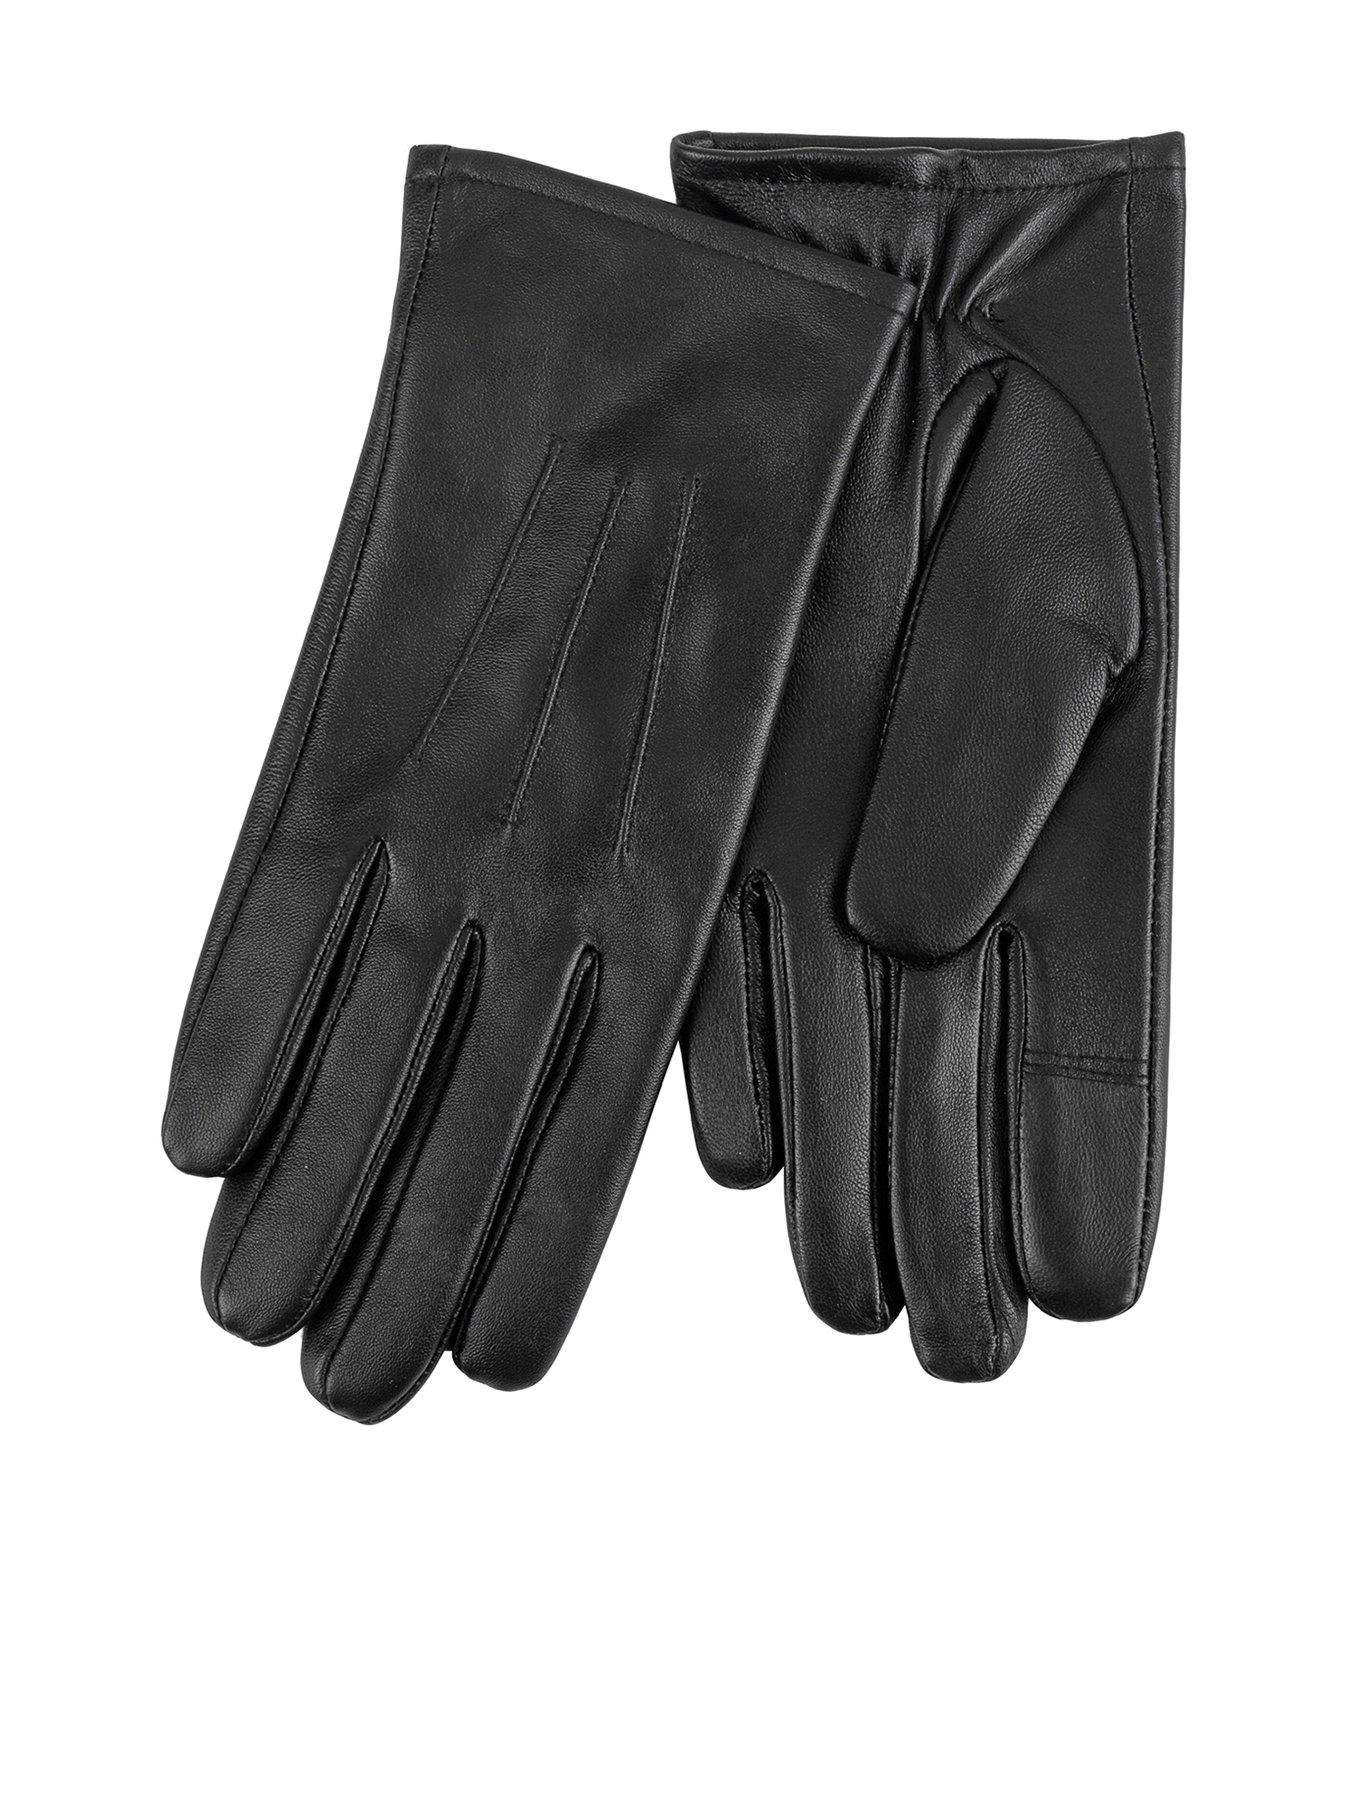  3 Point Smartouch Leather Gloves - Black